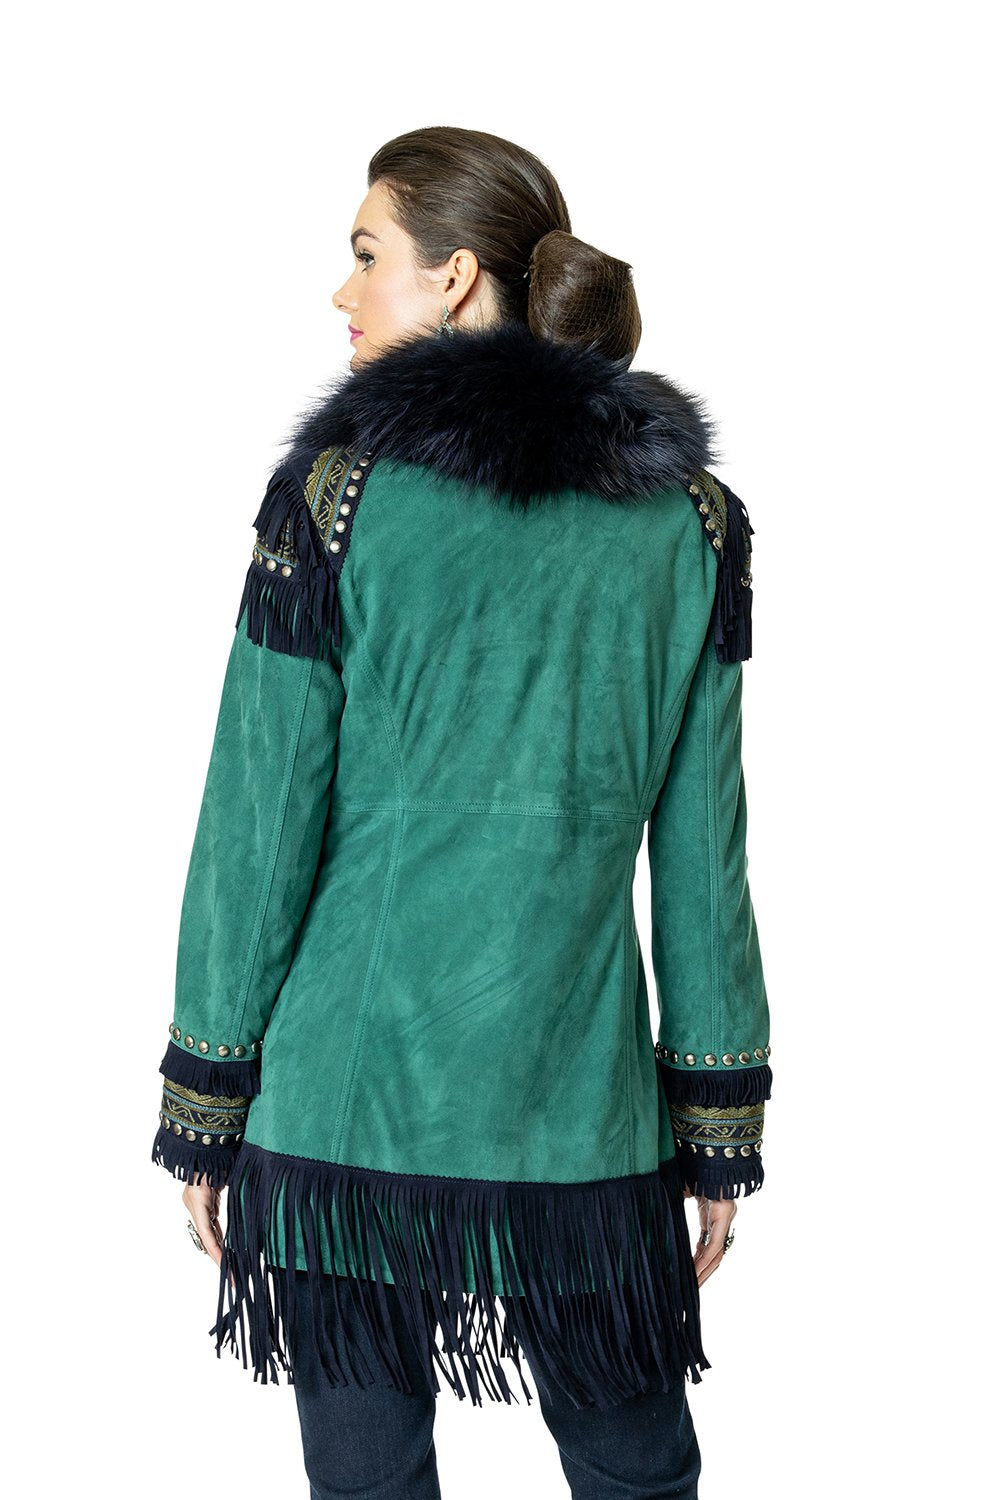 DDR Sandia Pass Teal Jacket 6Whiskey six whisky knee-length leather fringe coat Taos Holiday collection C2756